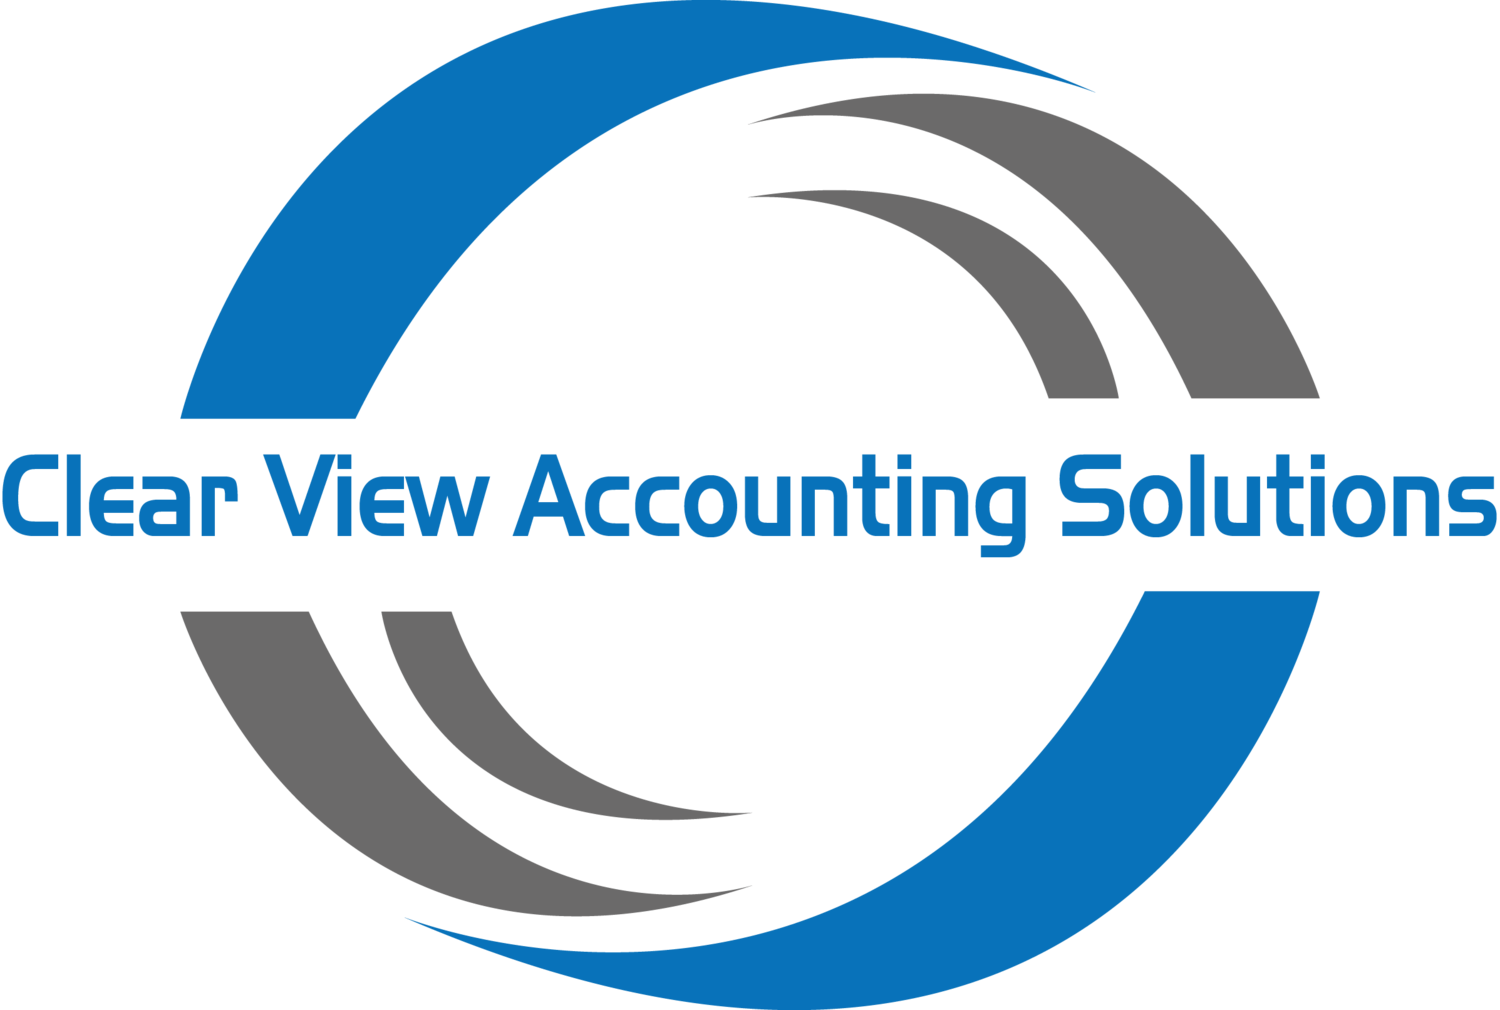 Clear View Accounting Solutions